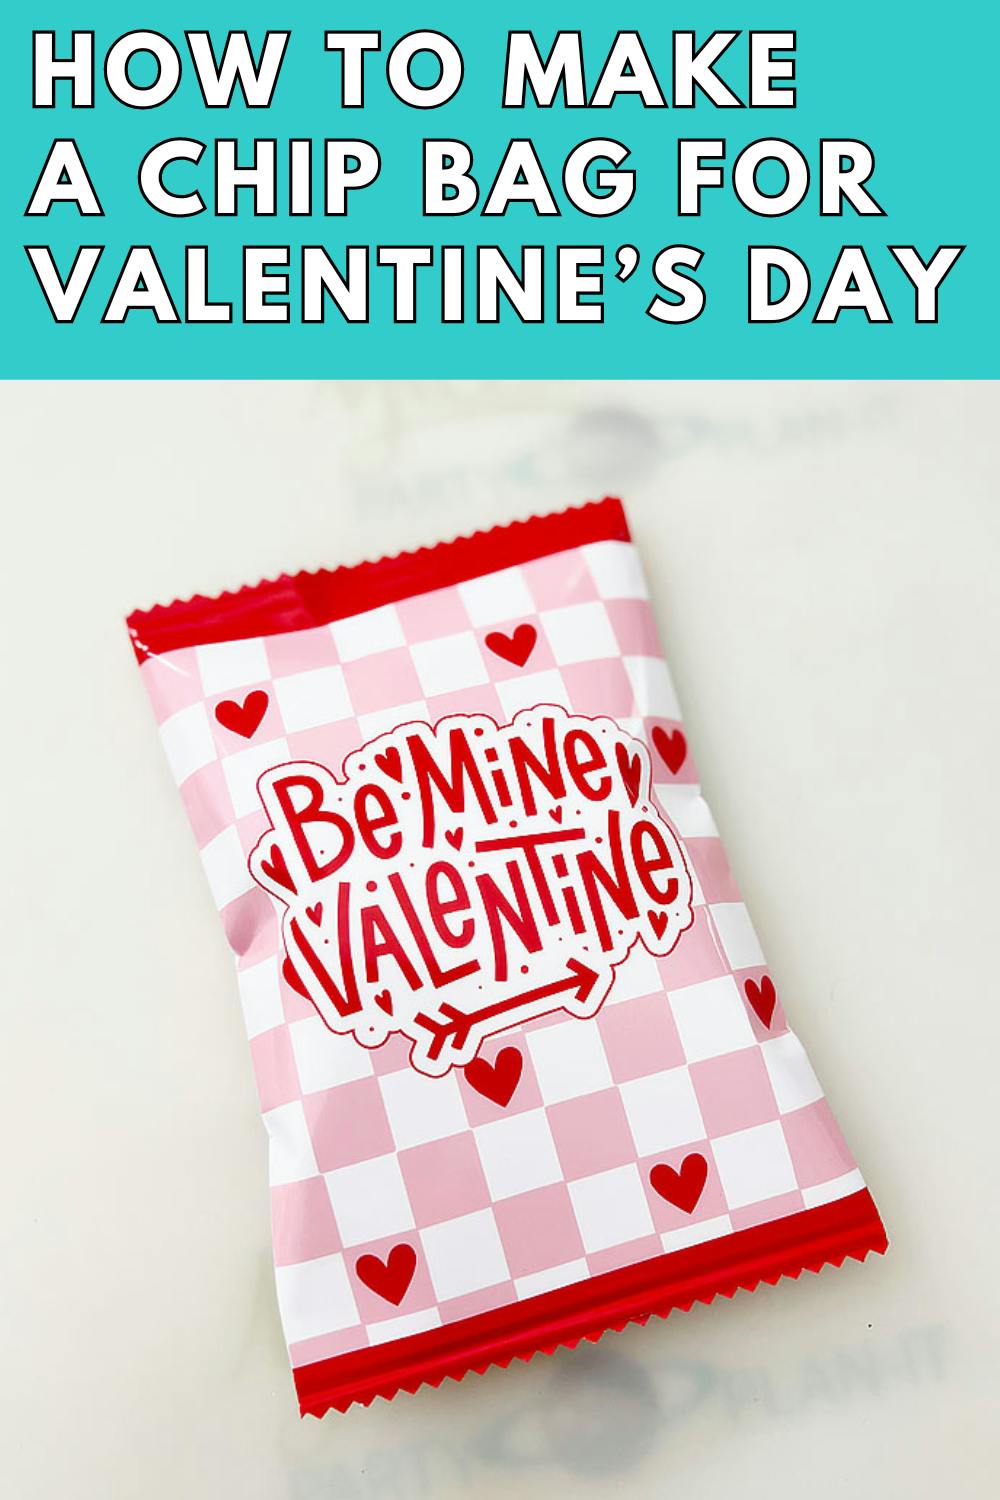 How to Make a Chip Bag for Valentine's Day - Michelle's Party Plan-It